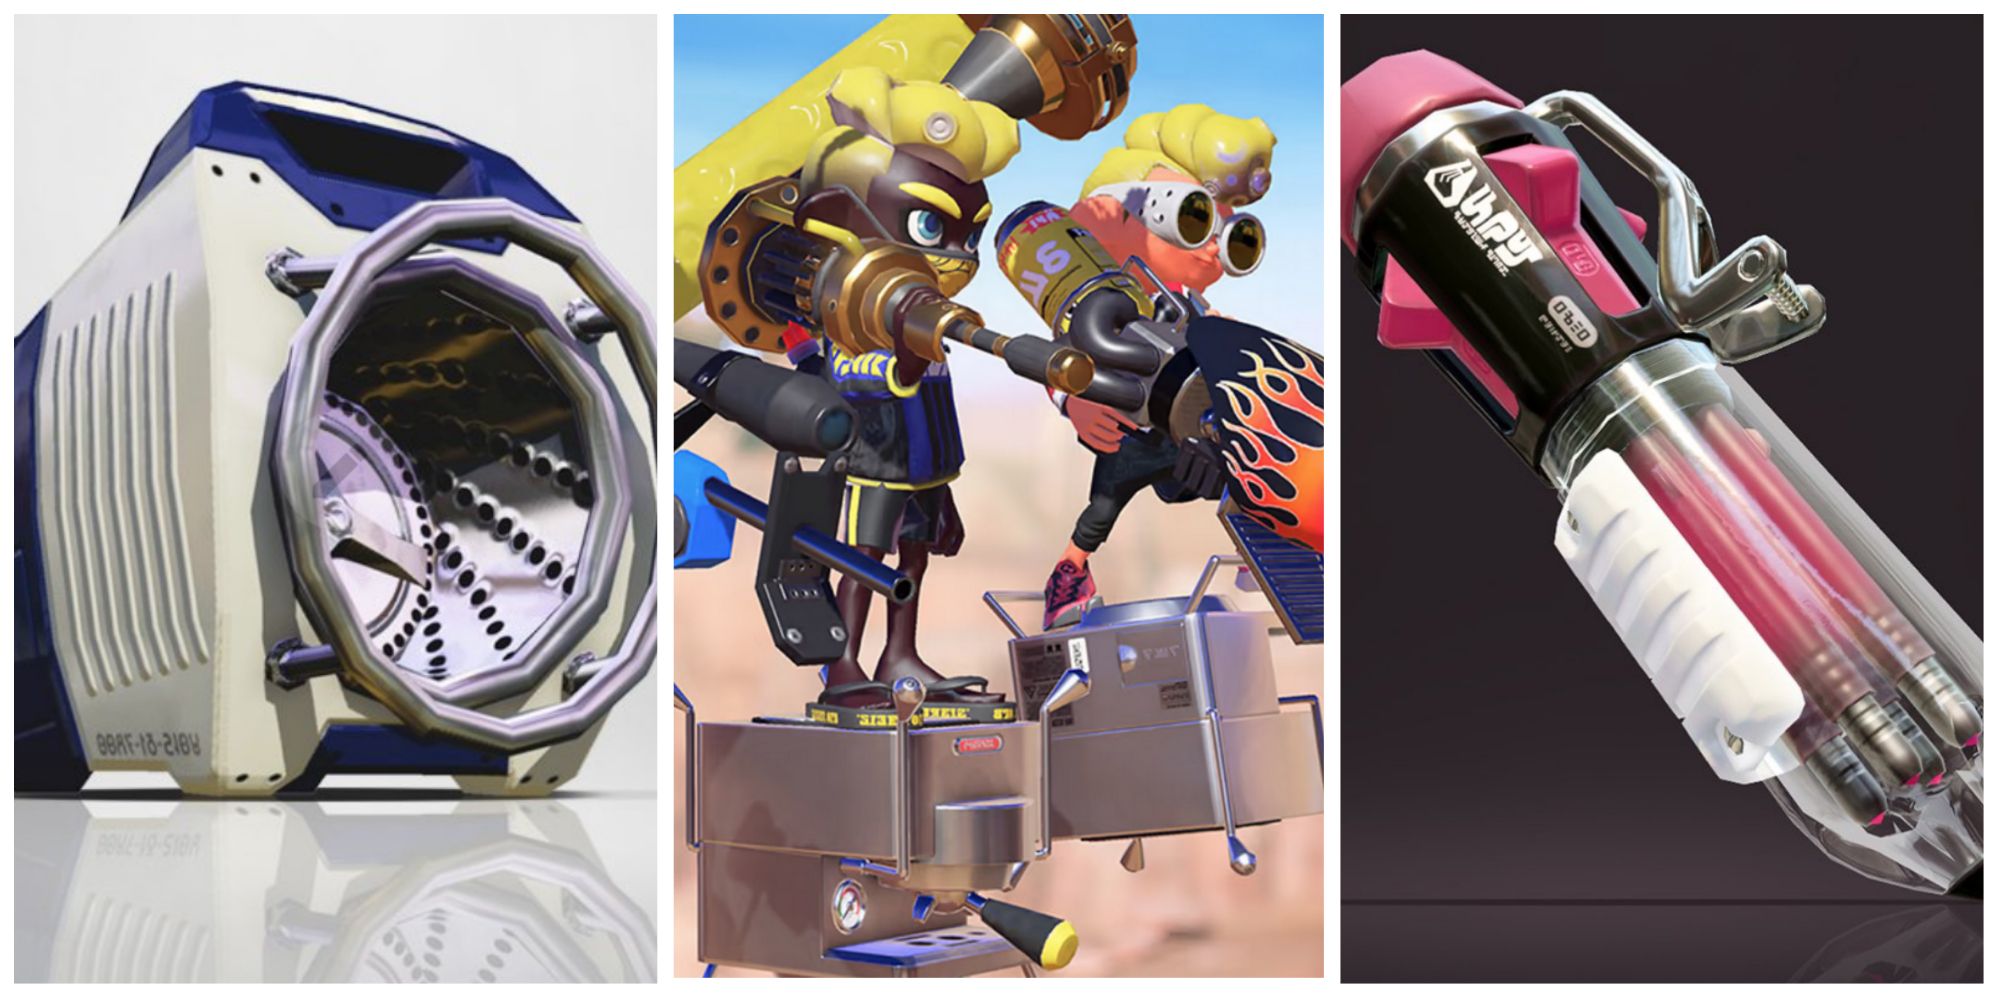 Header for X Of The Weirdest Weapons In Splatoon featuring Sloshing Machine, Octolings, Spawner Drone, and Ballpoint Splatling